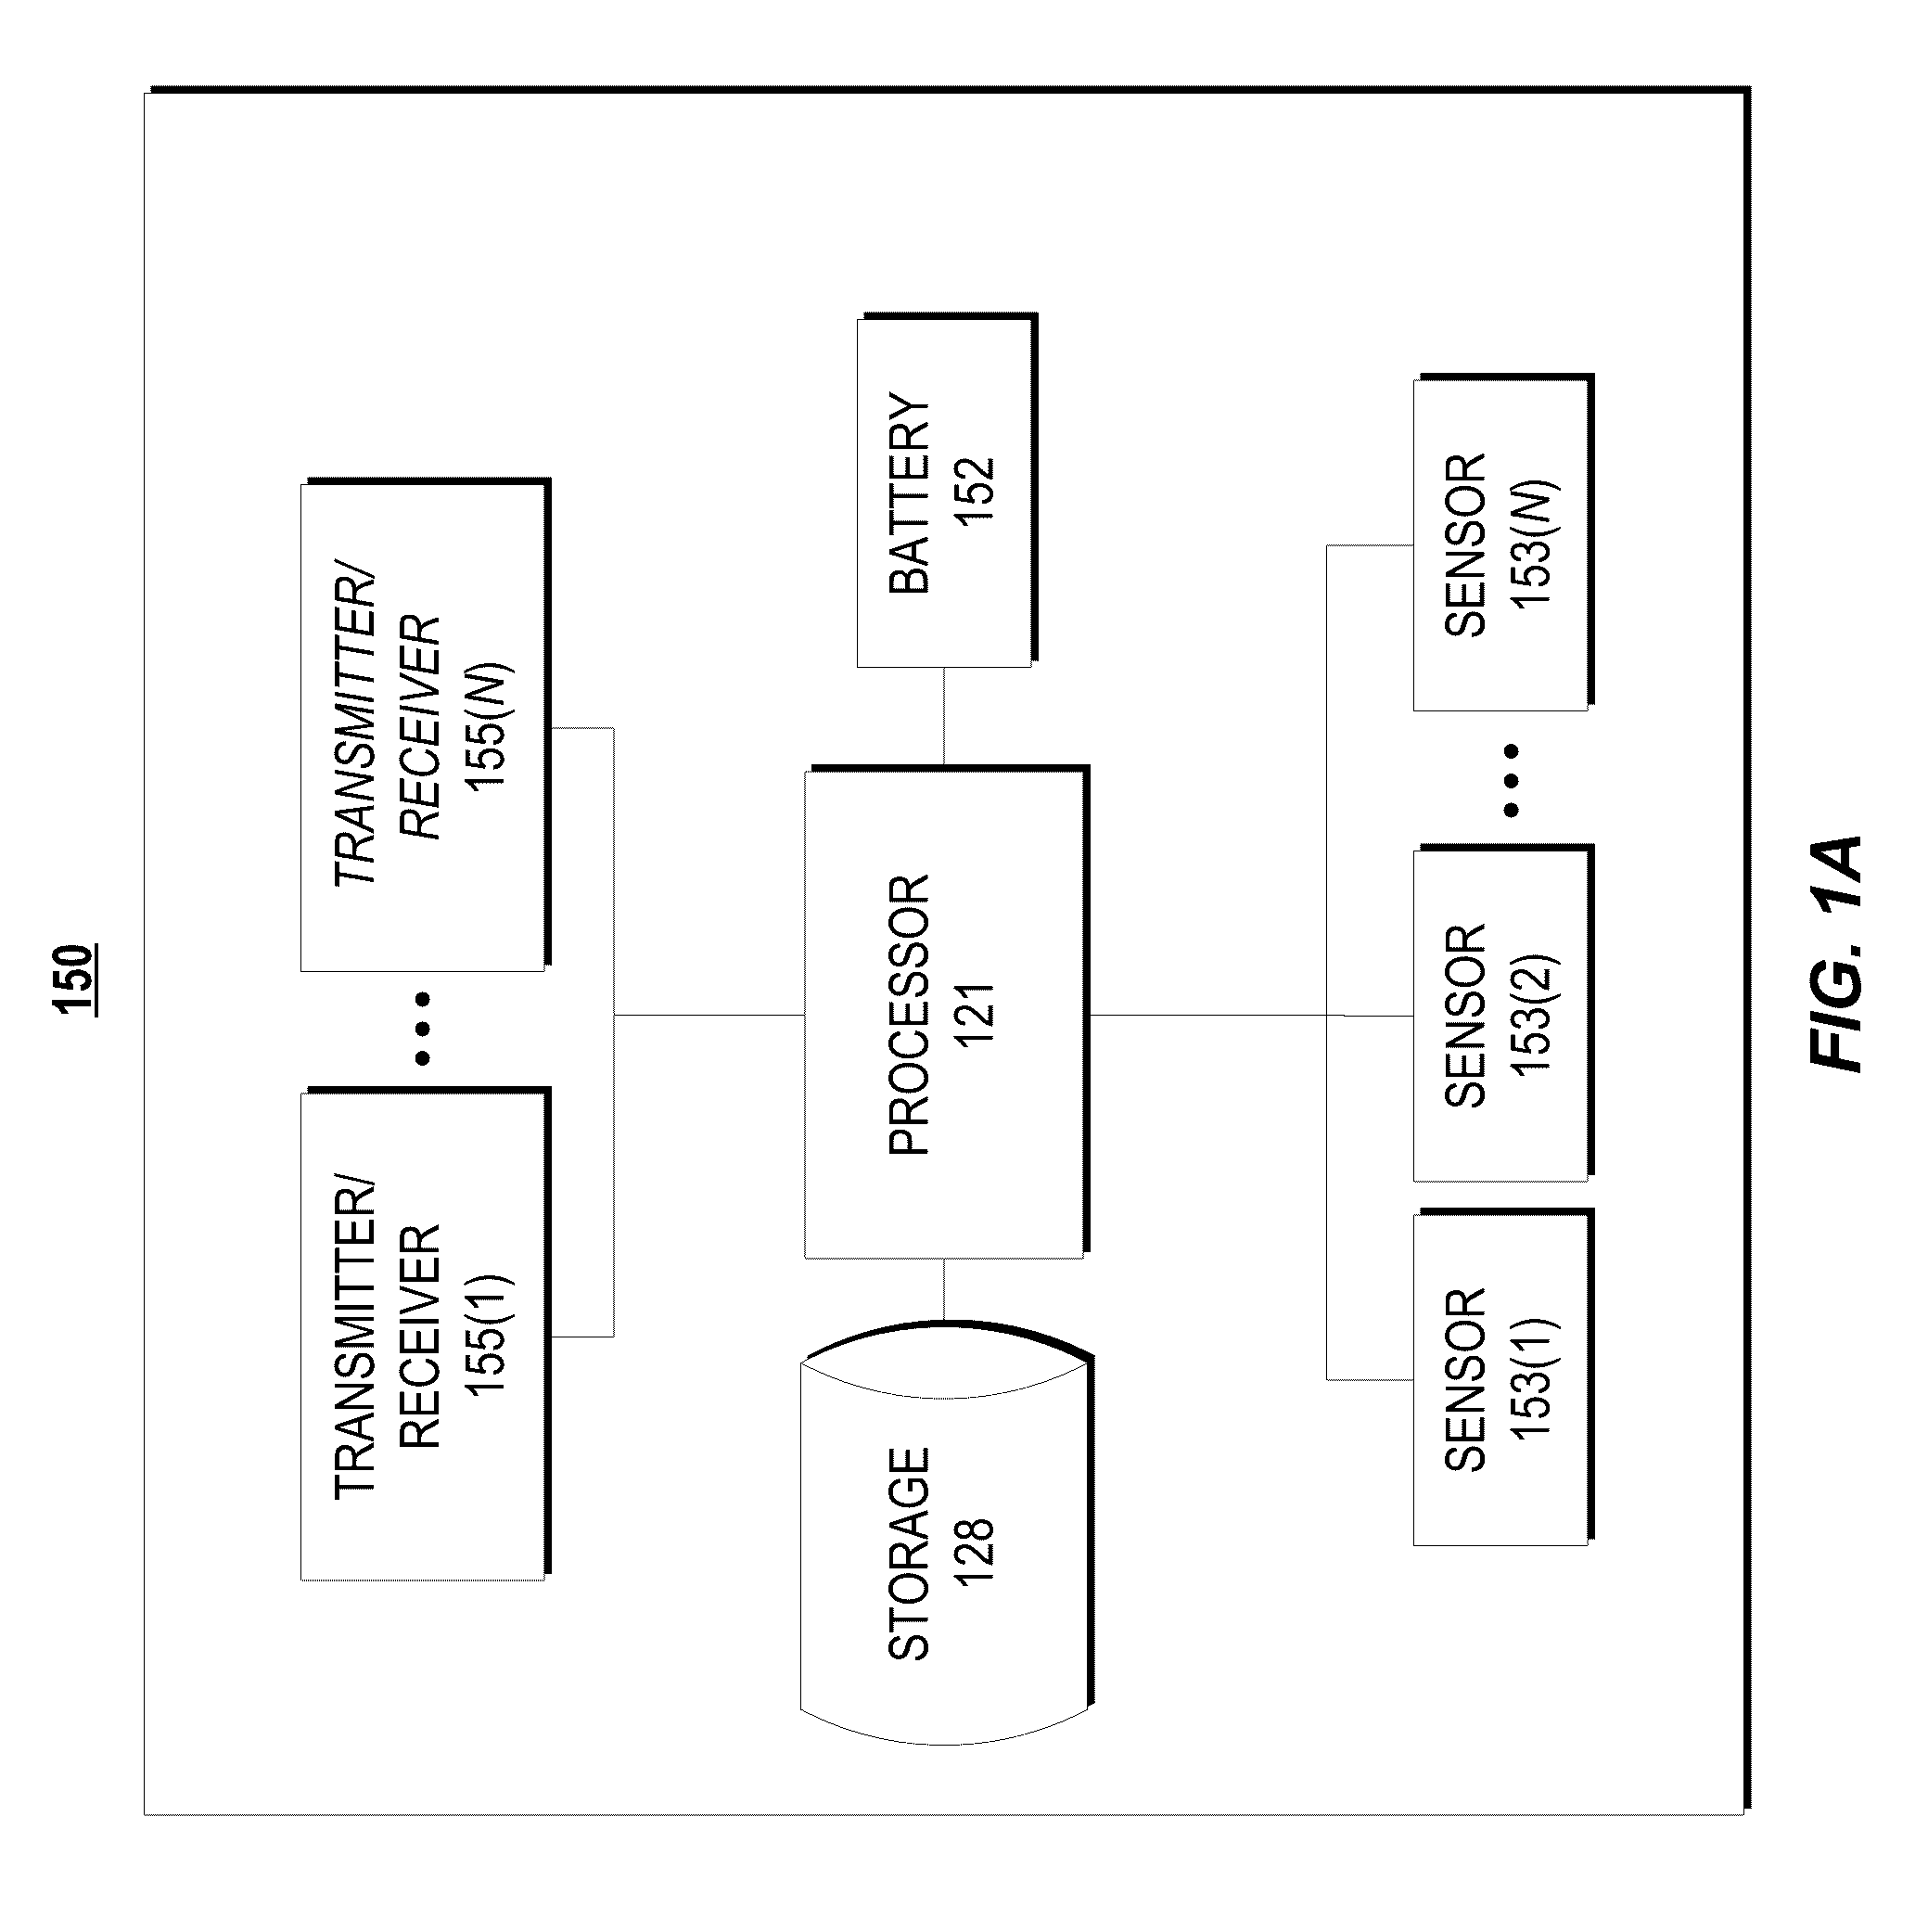 Power efficient system and method for measuring physical activity in resource constrained devices